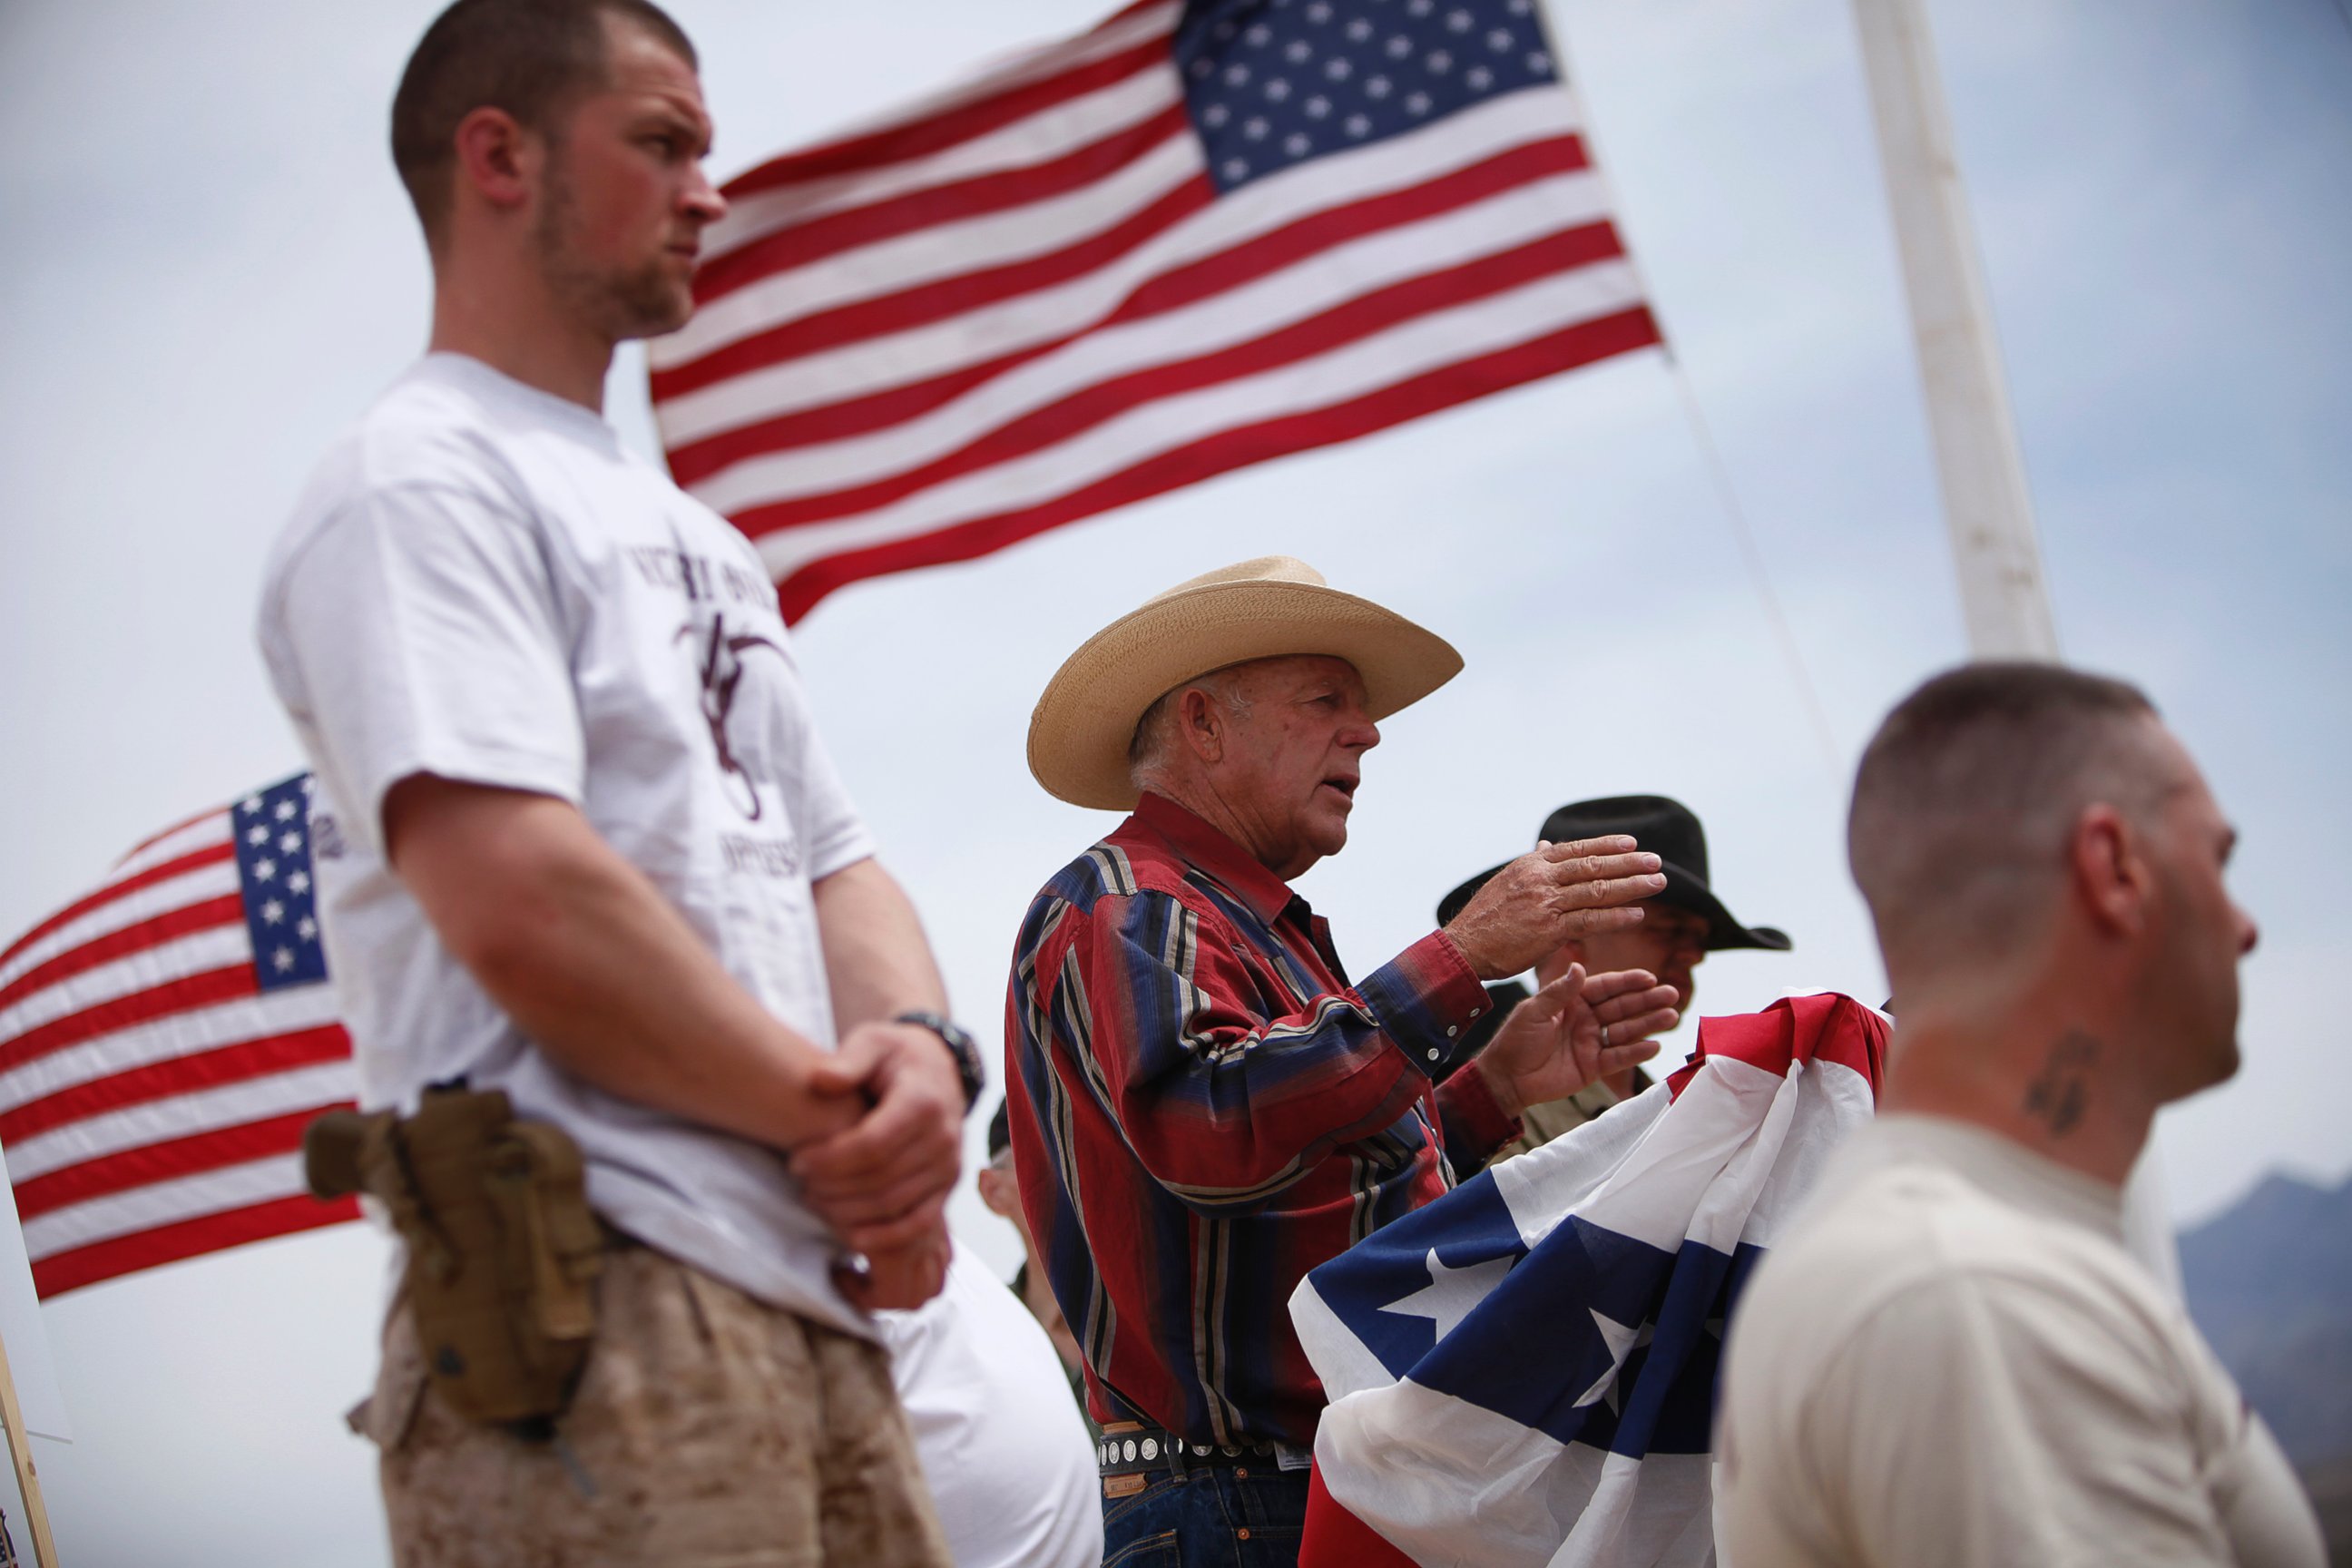 PHOTO: Flanked by armed supporters, rancher Cliven Bundy speaks at a protest camp near Bunkerville, Nev. Friday, April 18, 2014.